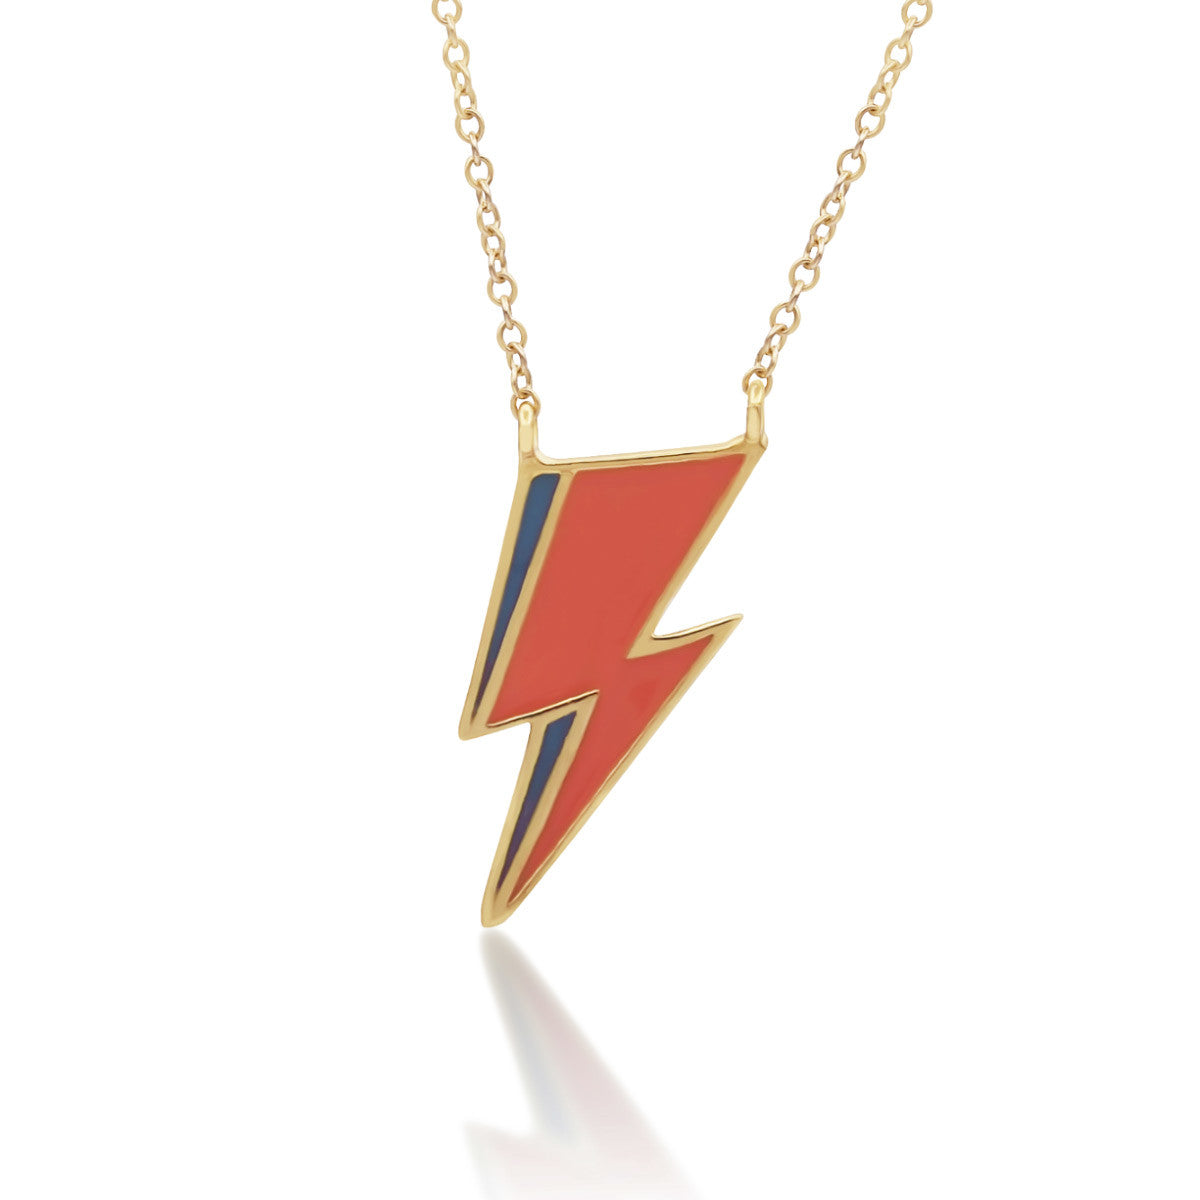 Bowie necklace gold